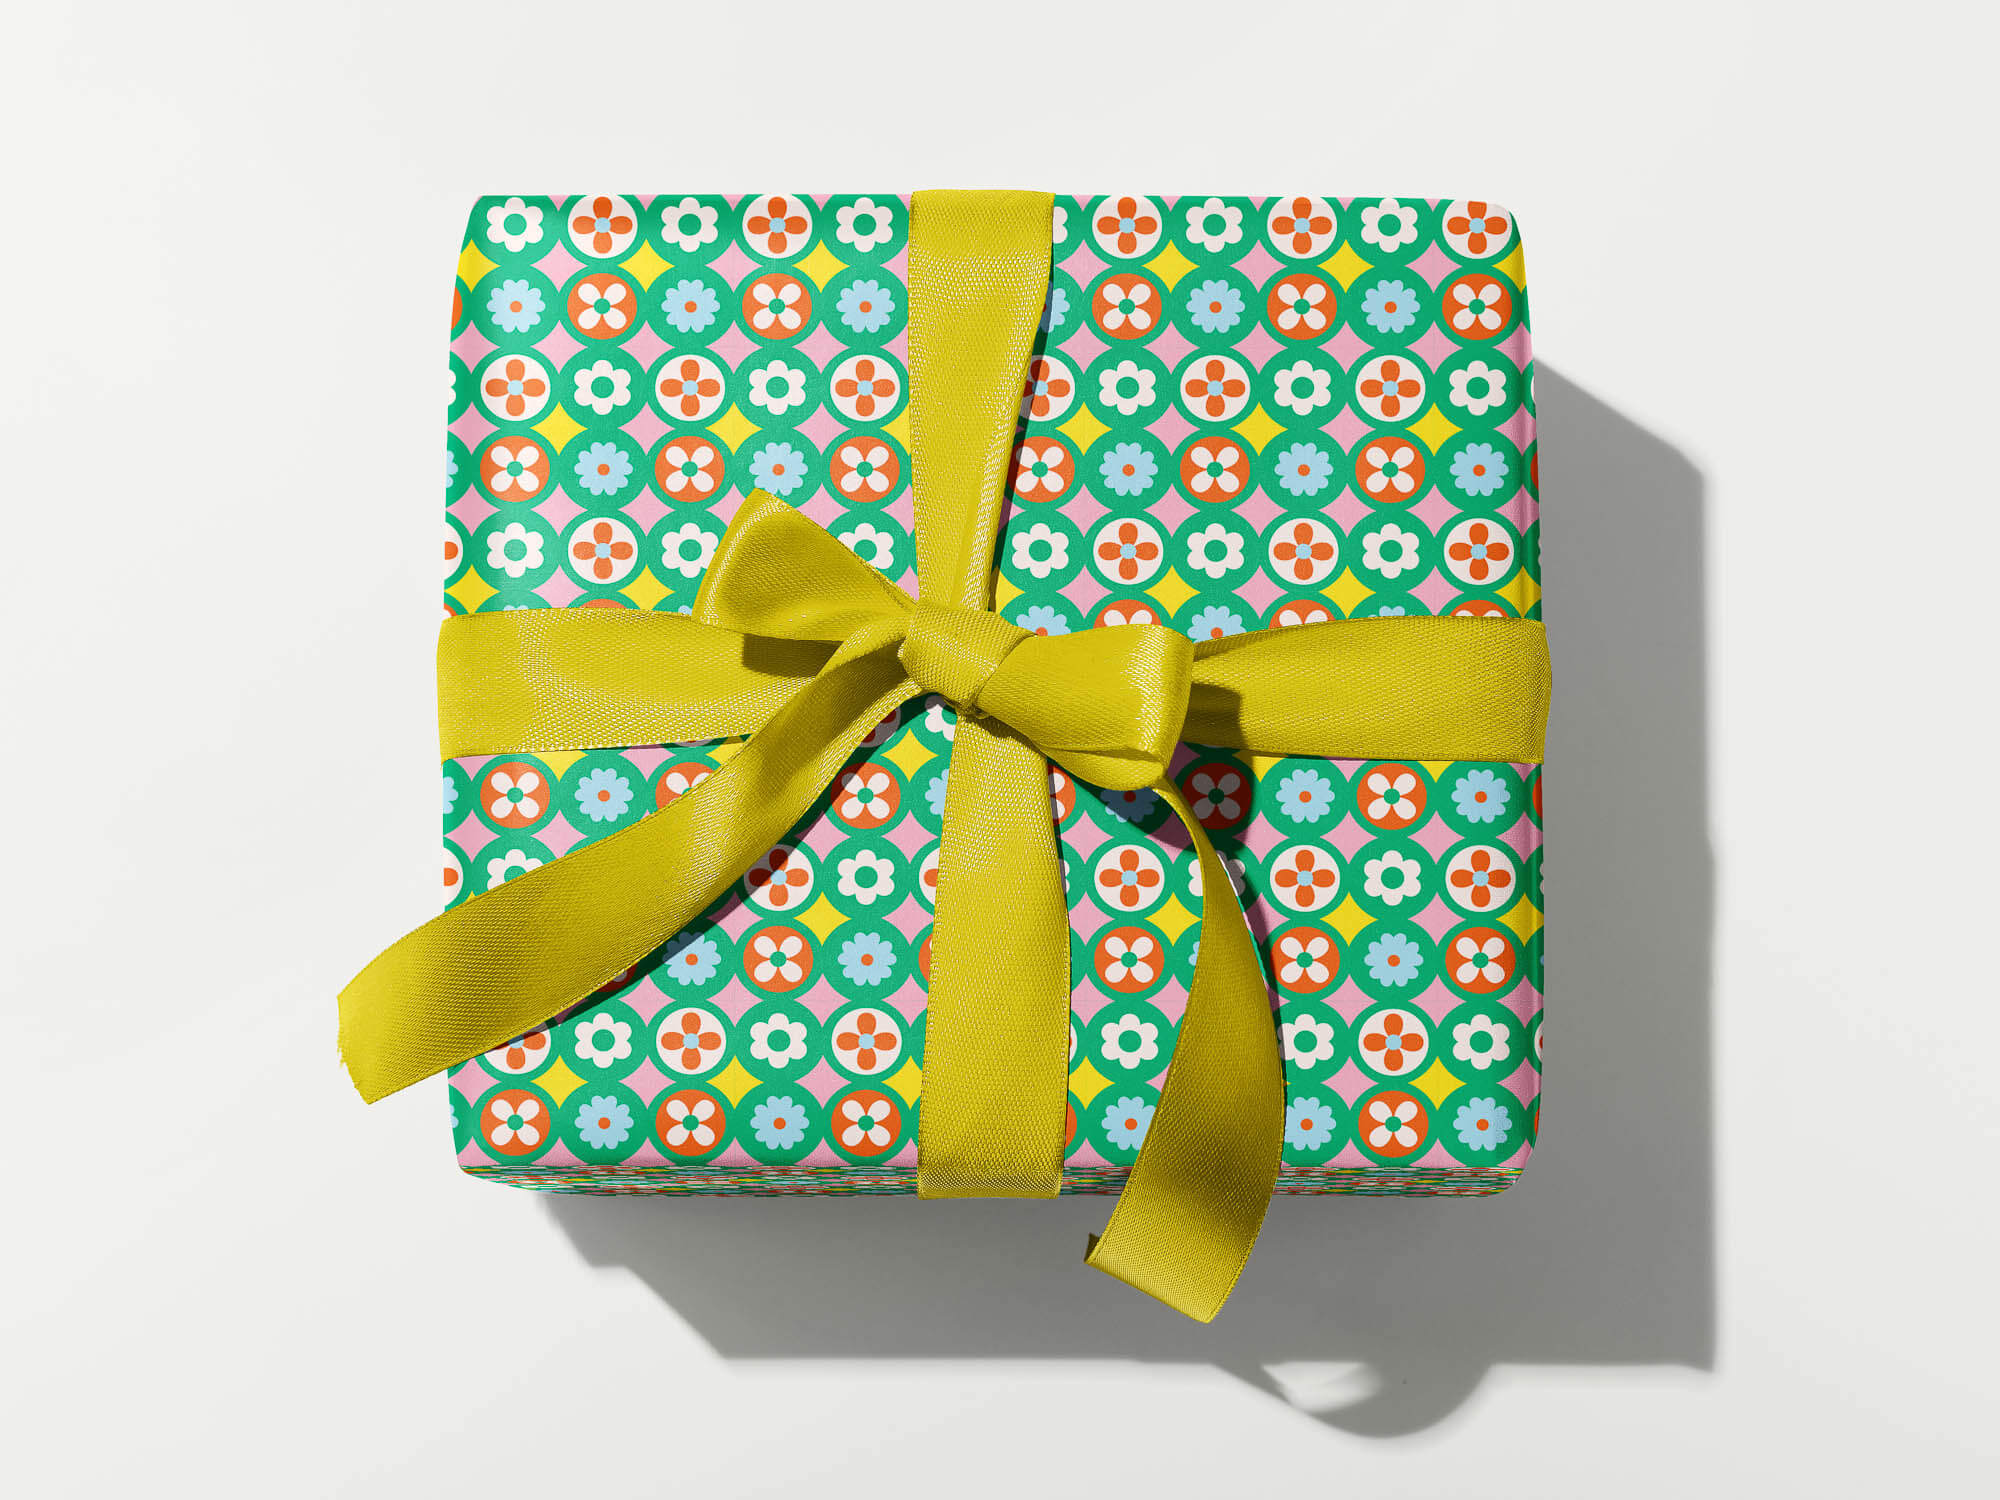 Mid-century Christmas wrapping paper with a jazzy razzle dazzle retro flower pattern. Made in USA by @mydarlin_bk